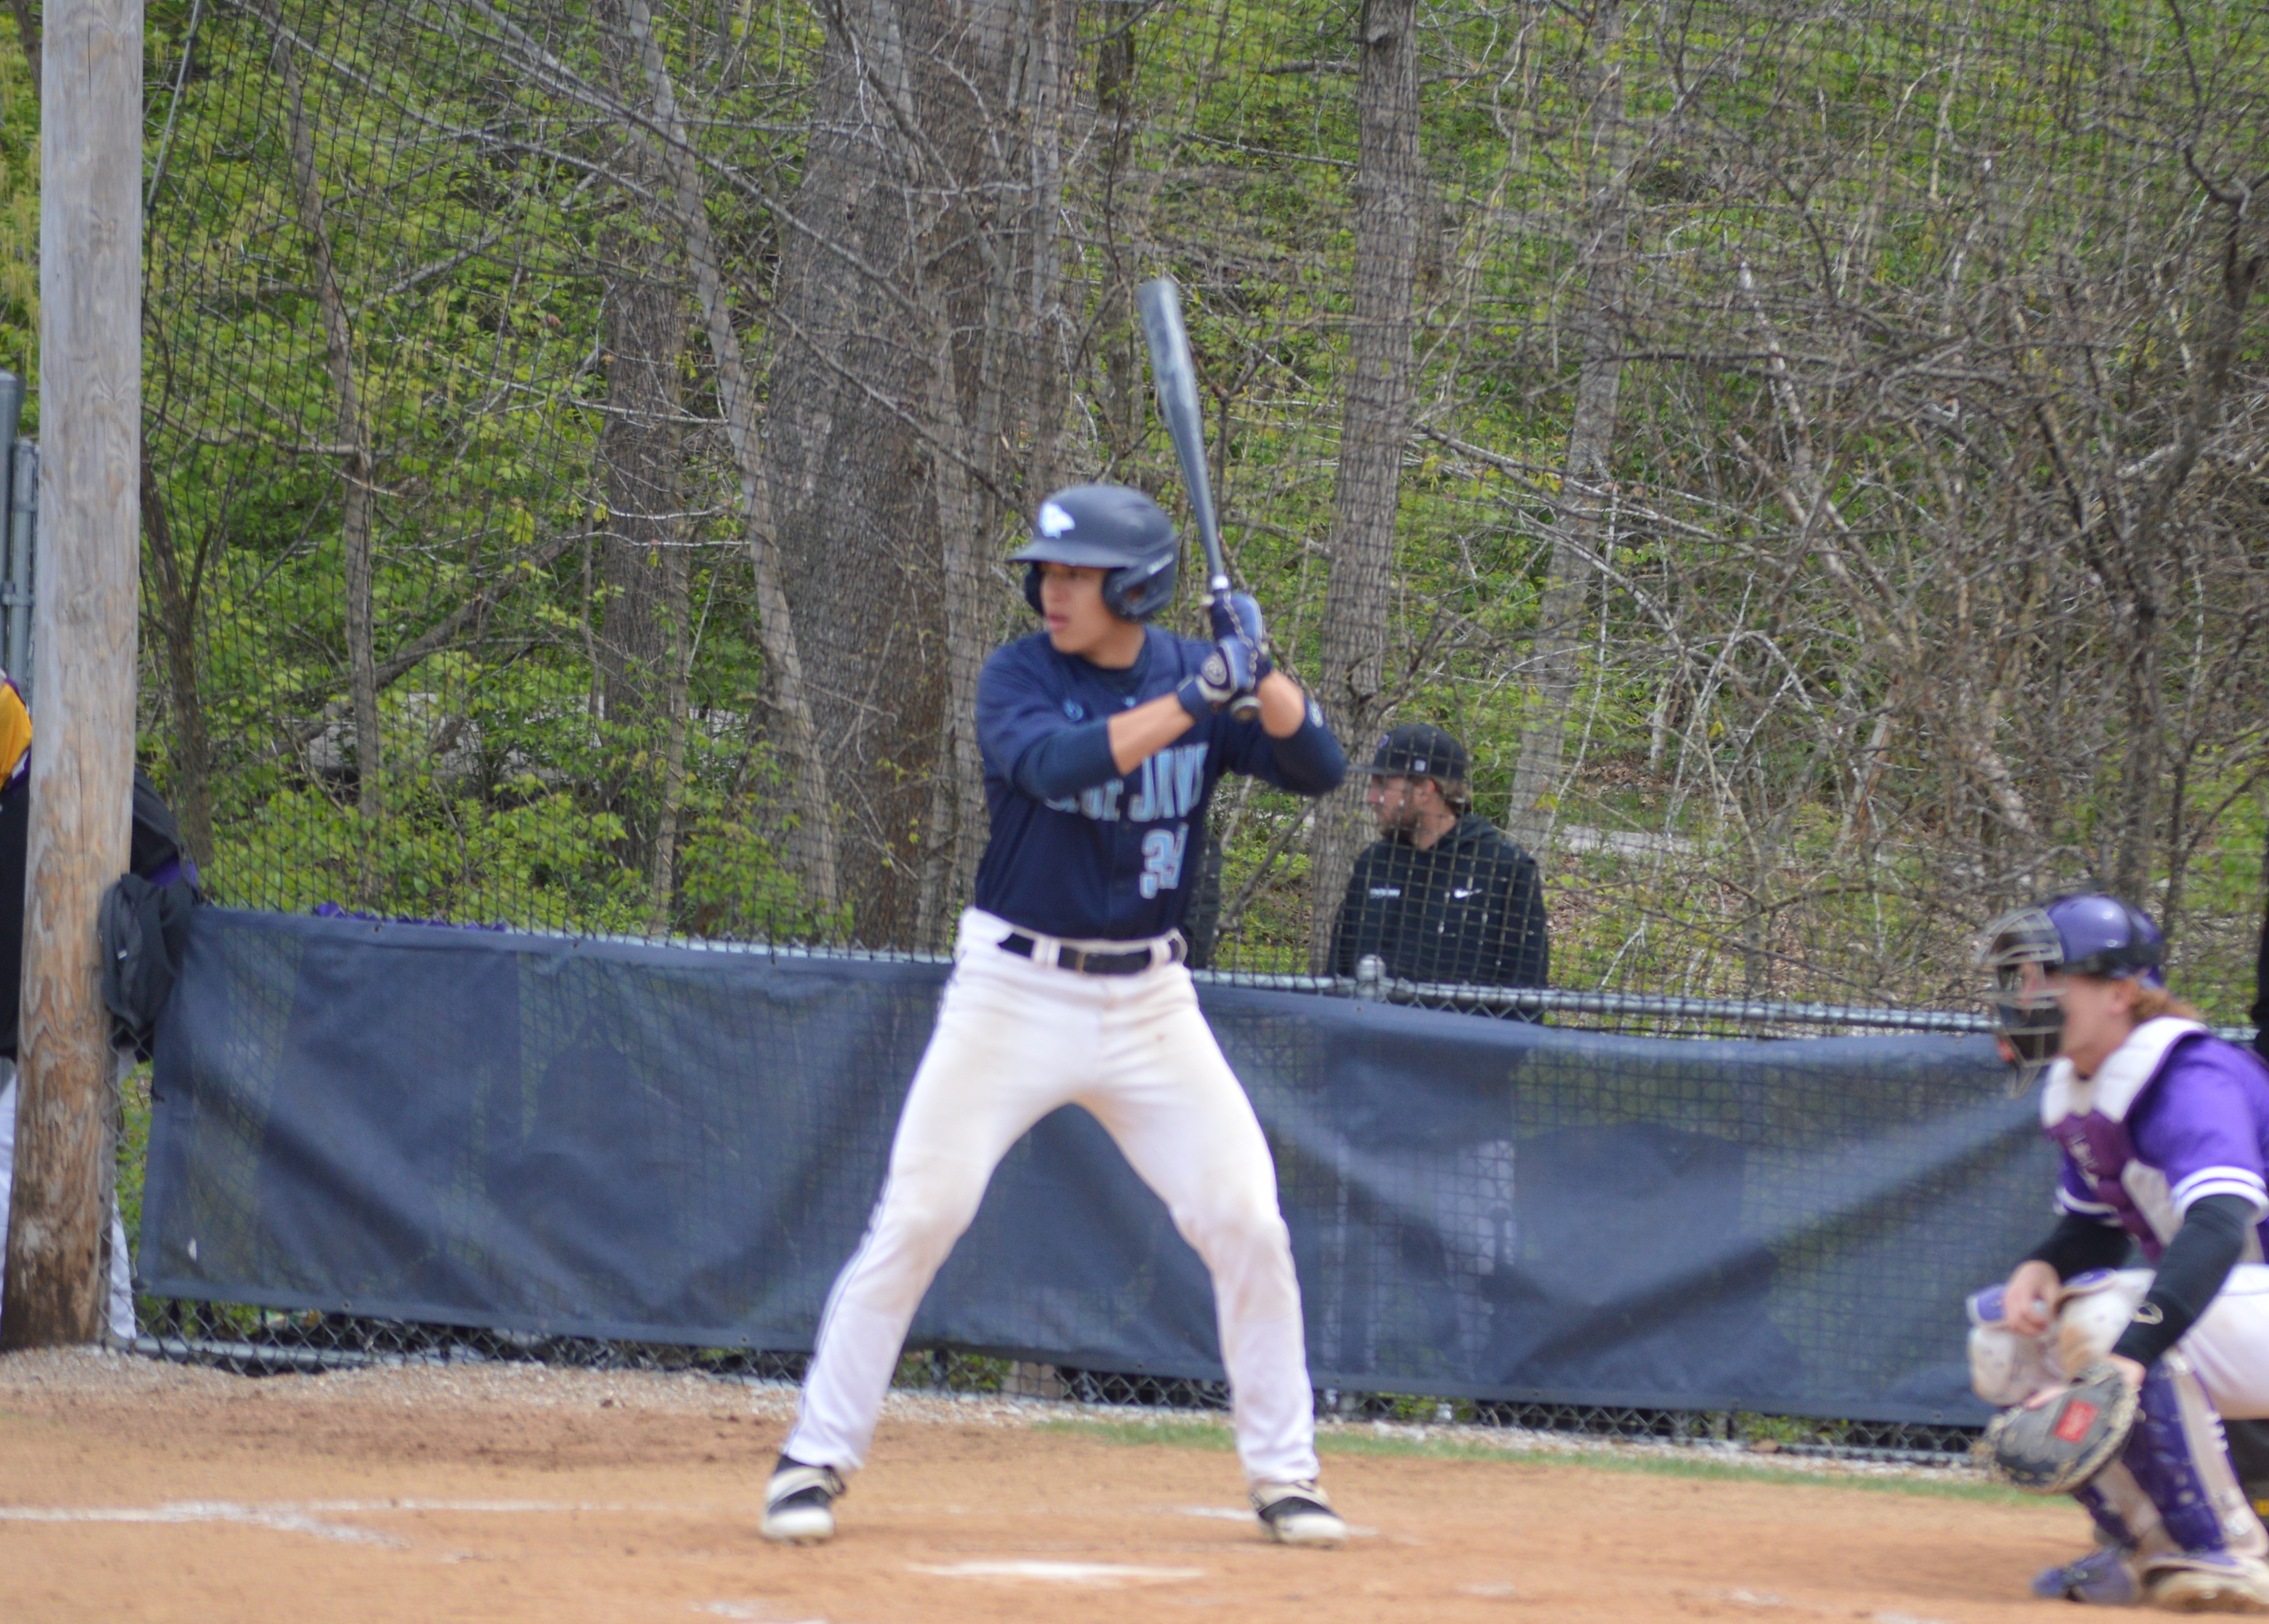 Steven Diaz went 4-7 on the day with two RBI's to help the Blue Jays to a double header split at Greenville University on Monday.